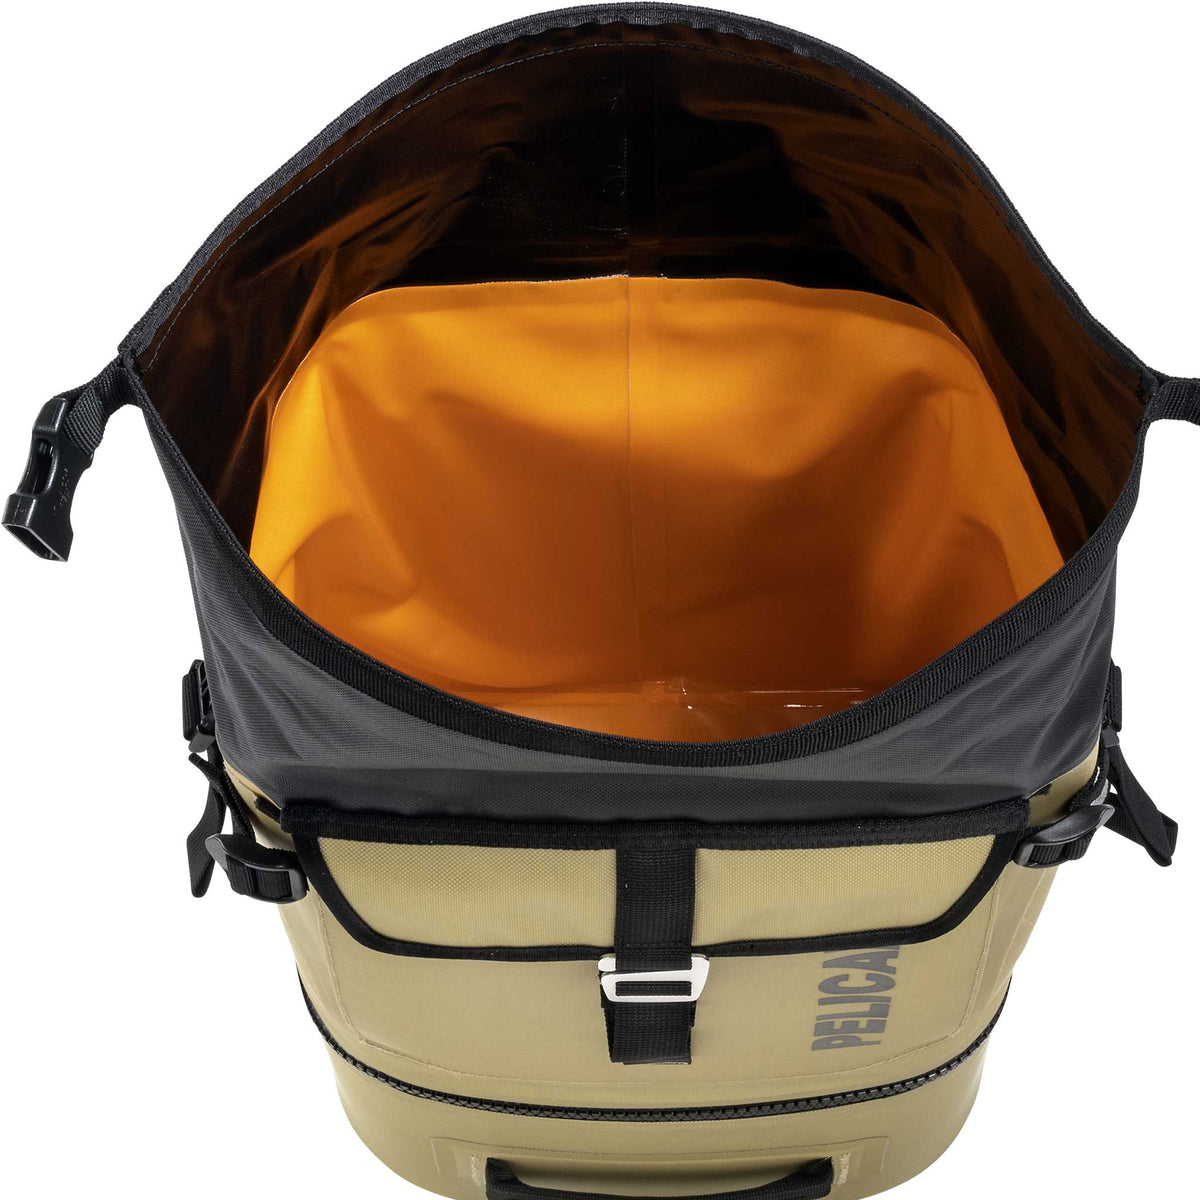 SOFT-CBKPK-COYOTE Pelican™ Dayventure Backpack Soft Cooler dry bag compartment opened 